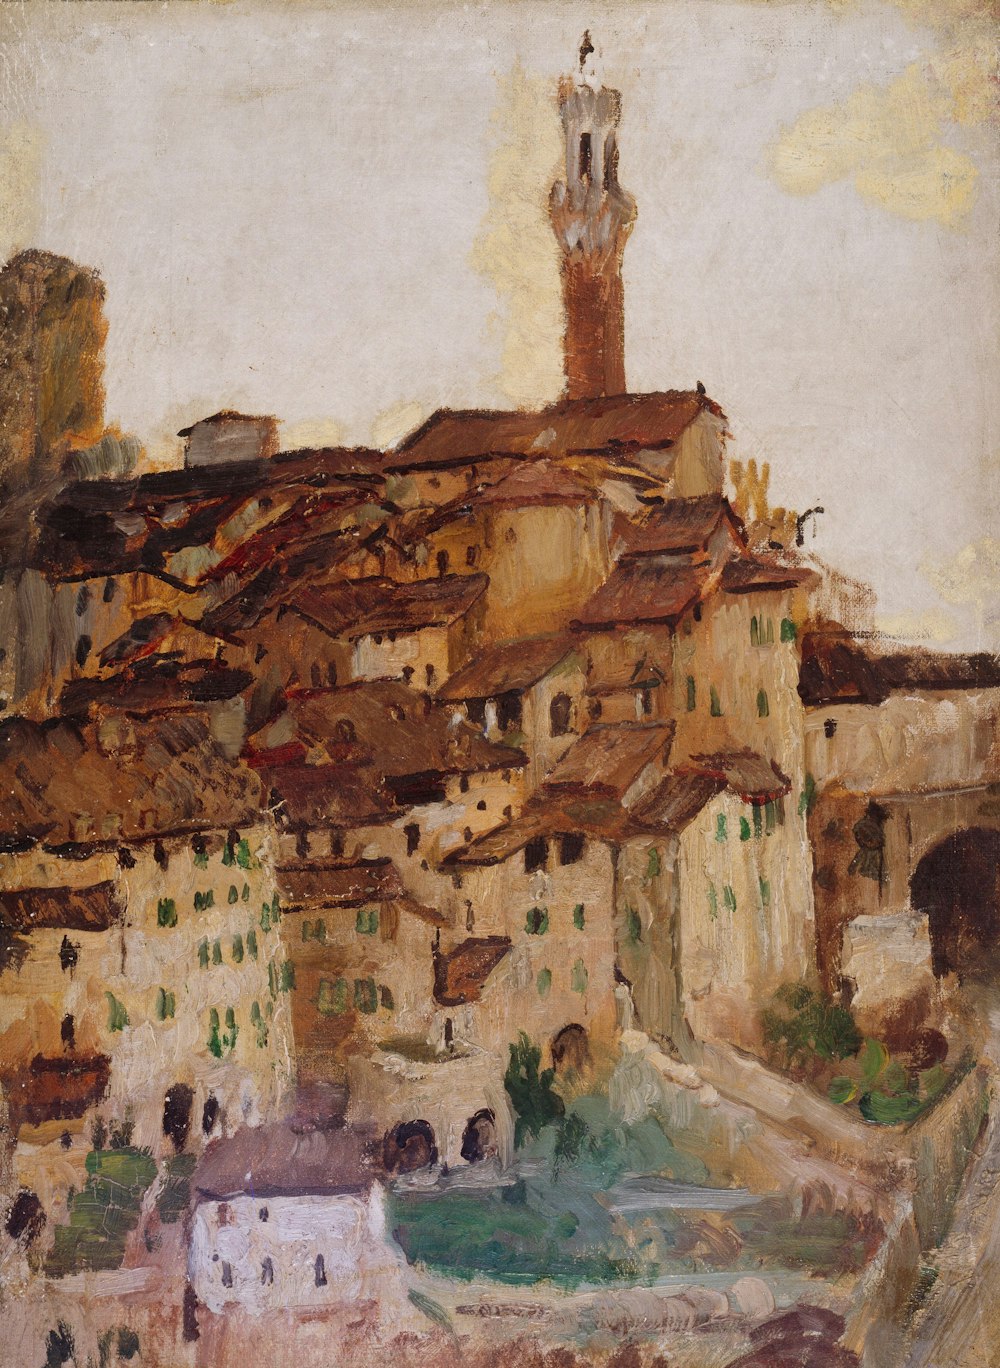 a painting of a village with a clock tower